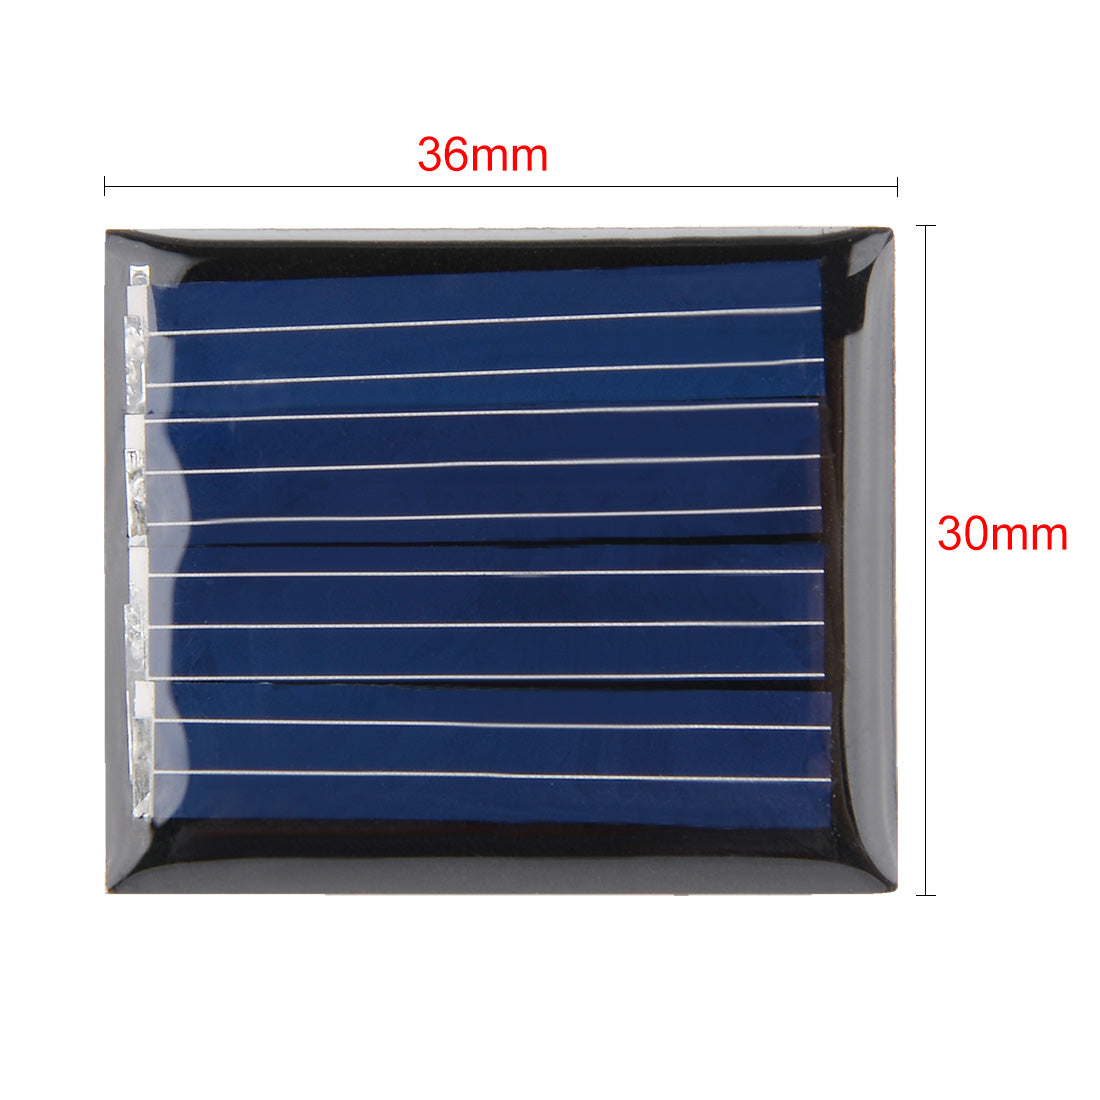 uxcell Uxcell 5Pcs 2V 60mA Poly Mini Solar Cell Panel Module DIY for Light Toys Charger 30mm x 36mm